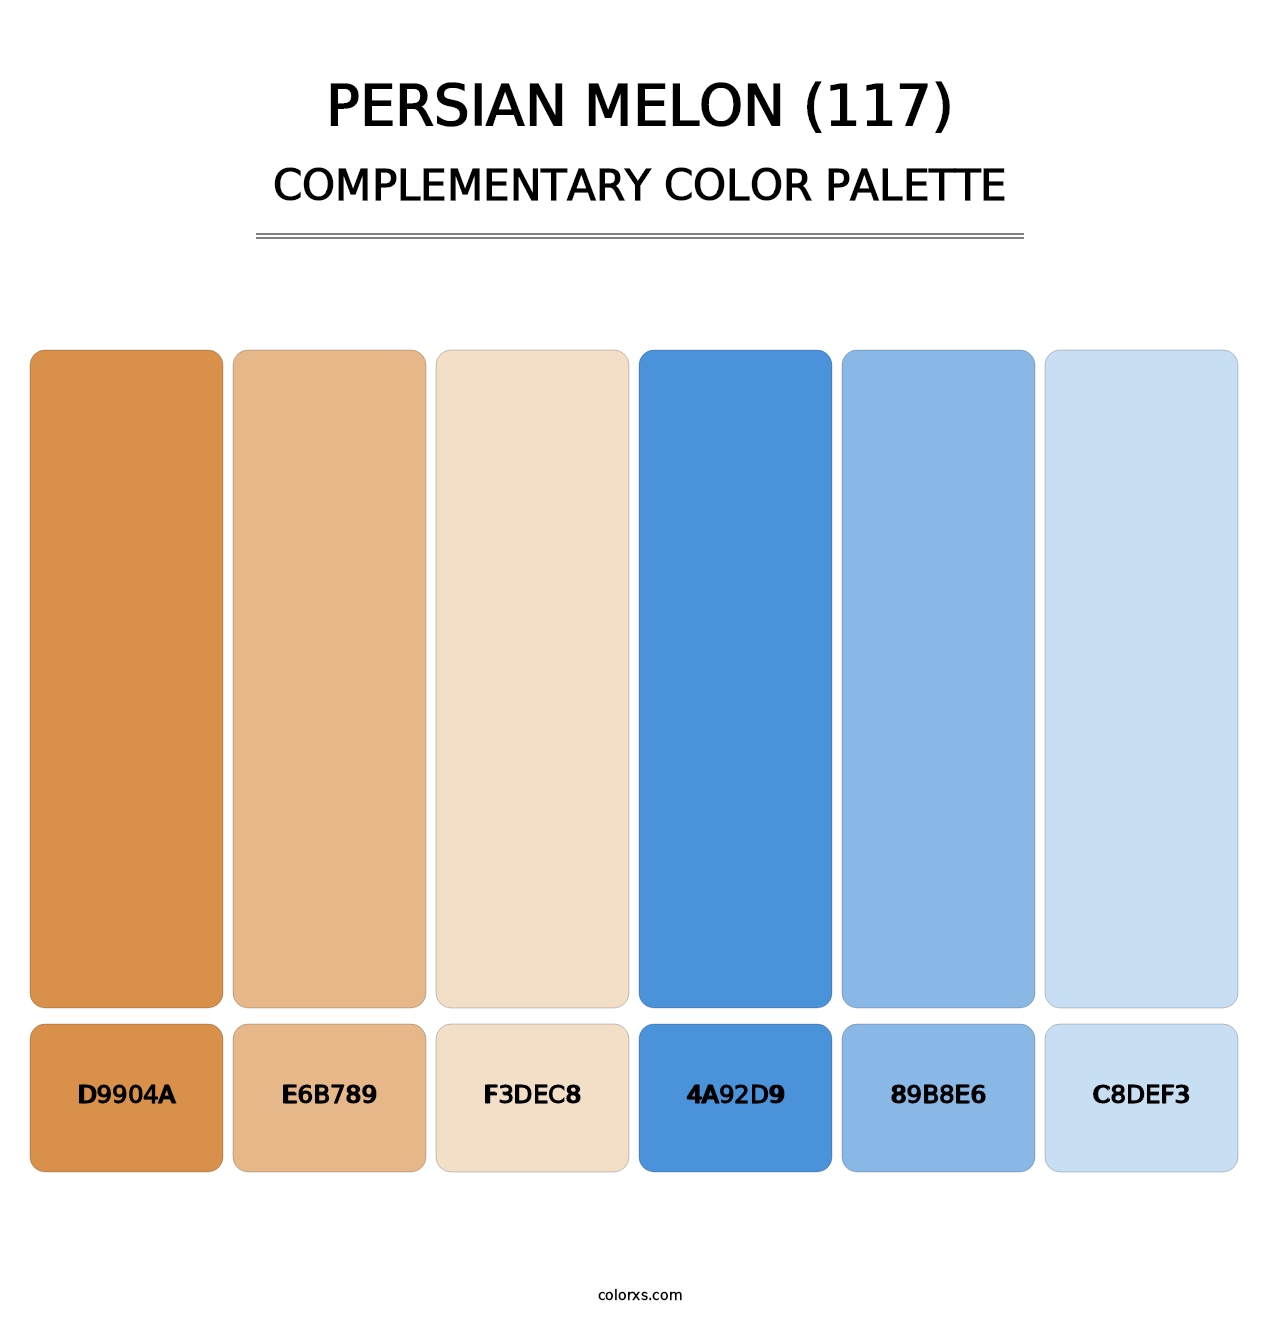 Persian Melon (117) - Complementary Color Palette